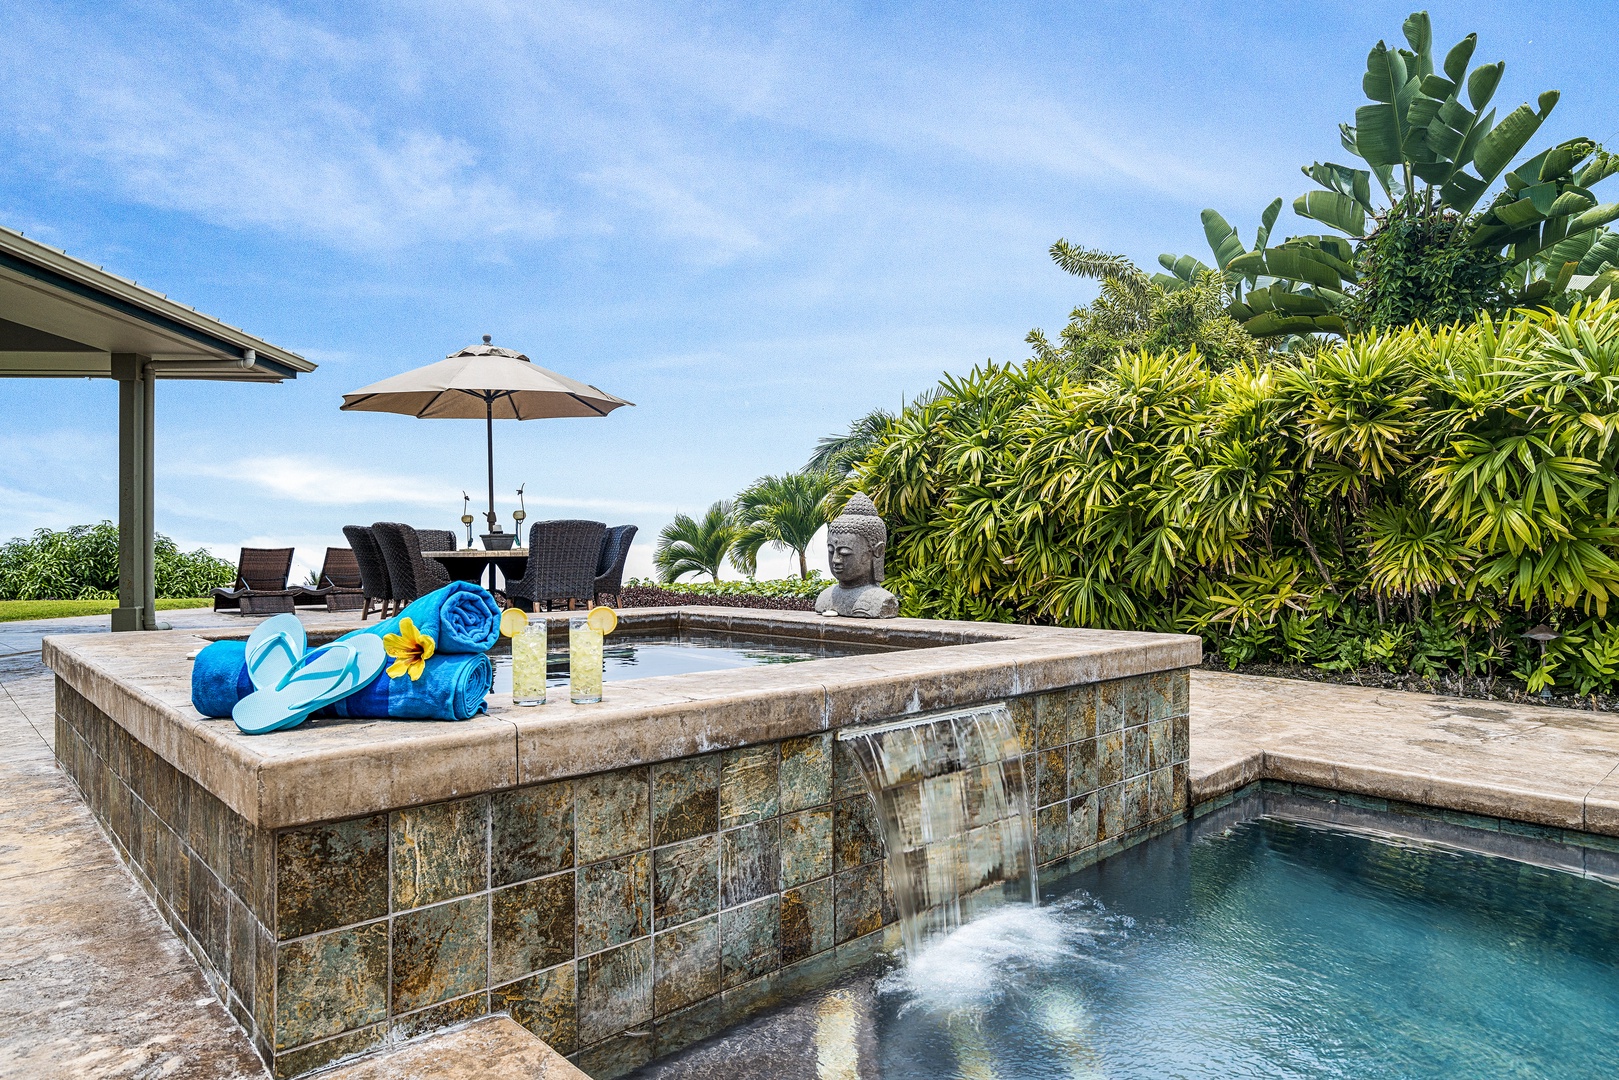 Kailua Kona Vacation Rentals, Sunset Hale - Private spa which flows into the pool is absolutely divine!